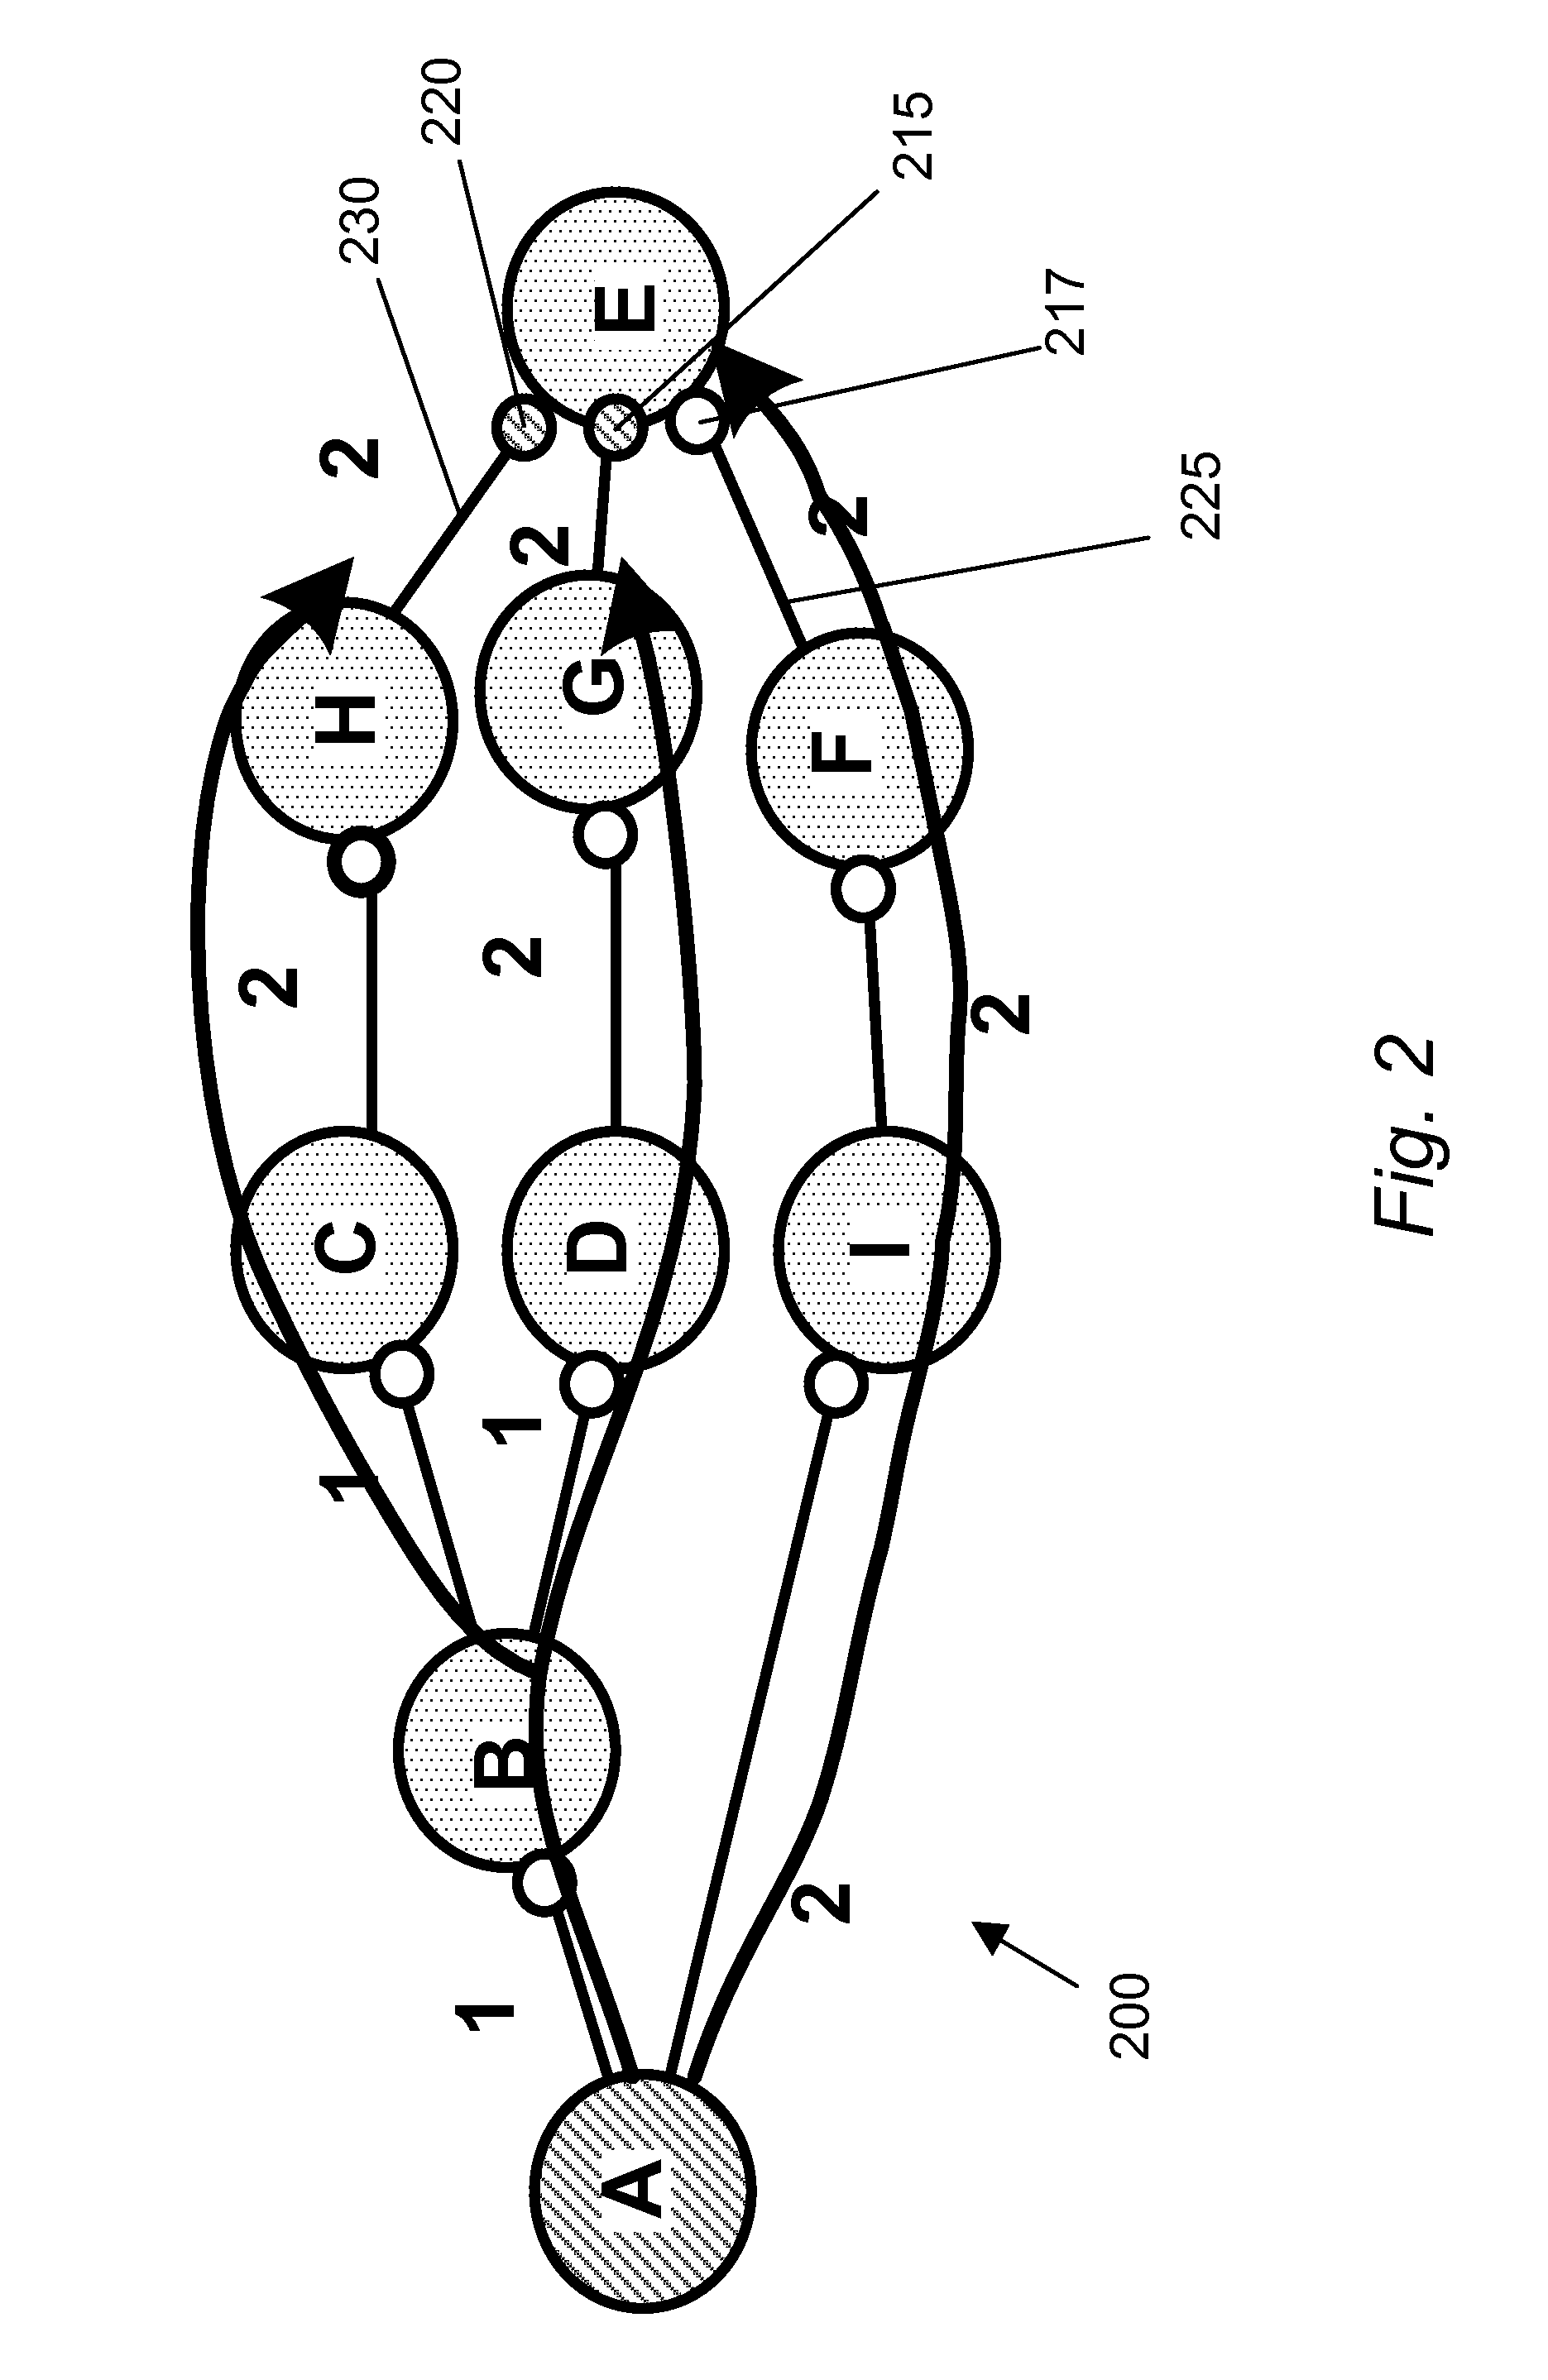 Methods and devices for improving the multiple spanning tree protocol